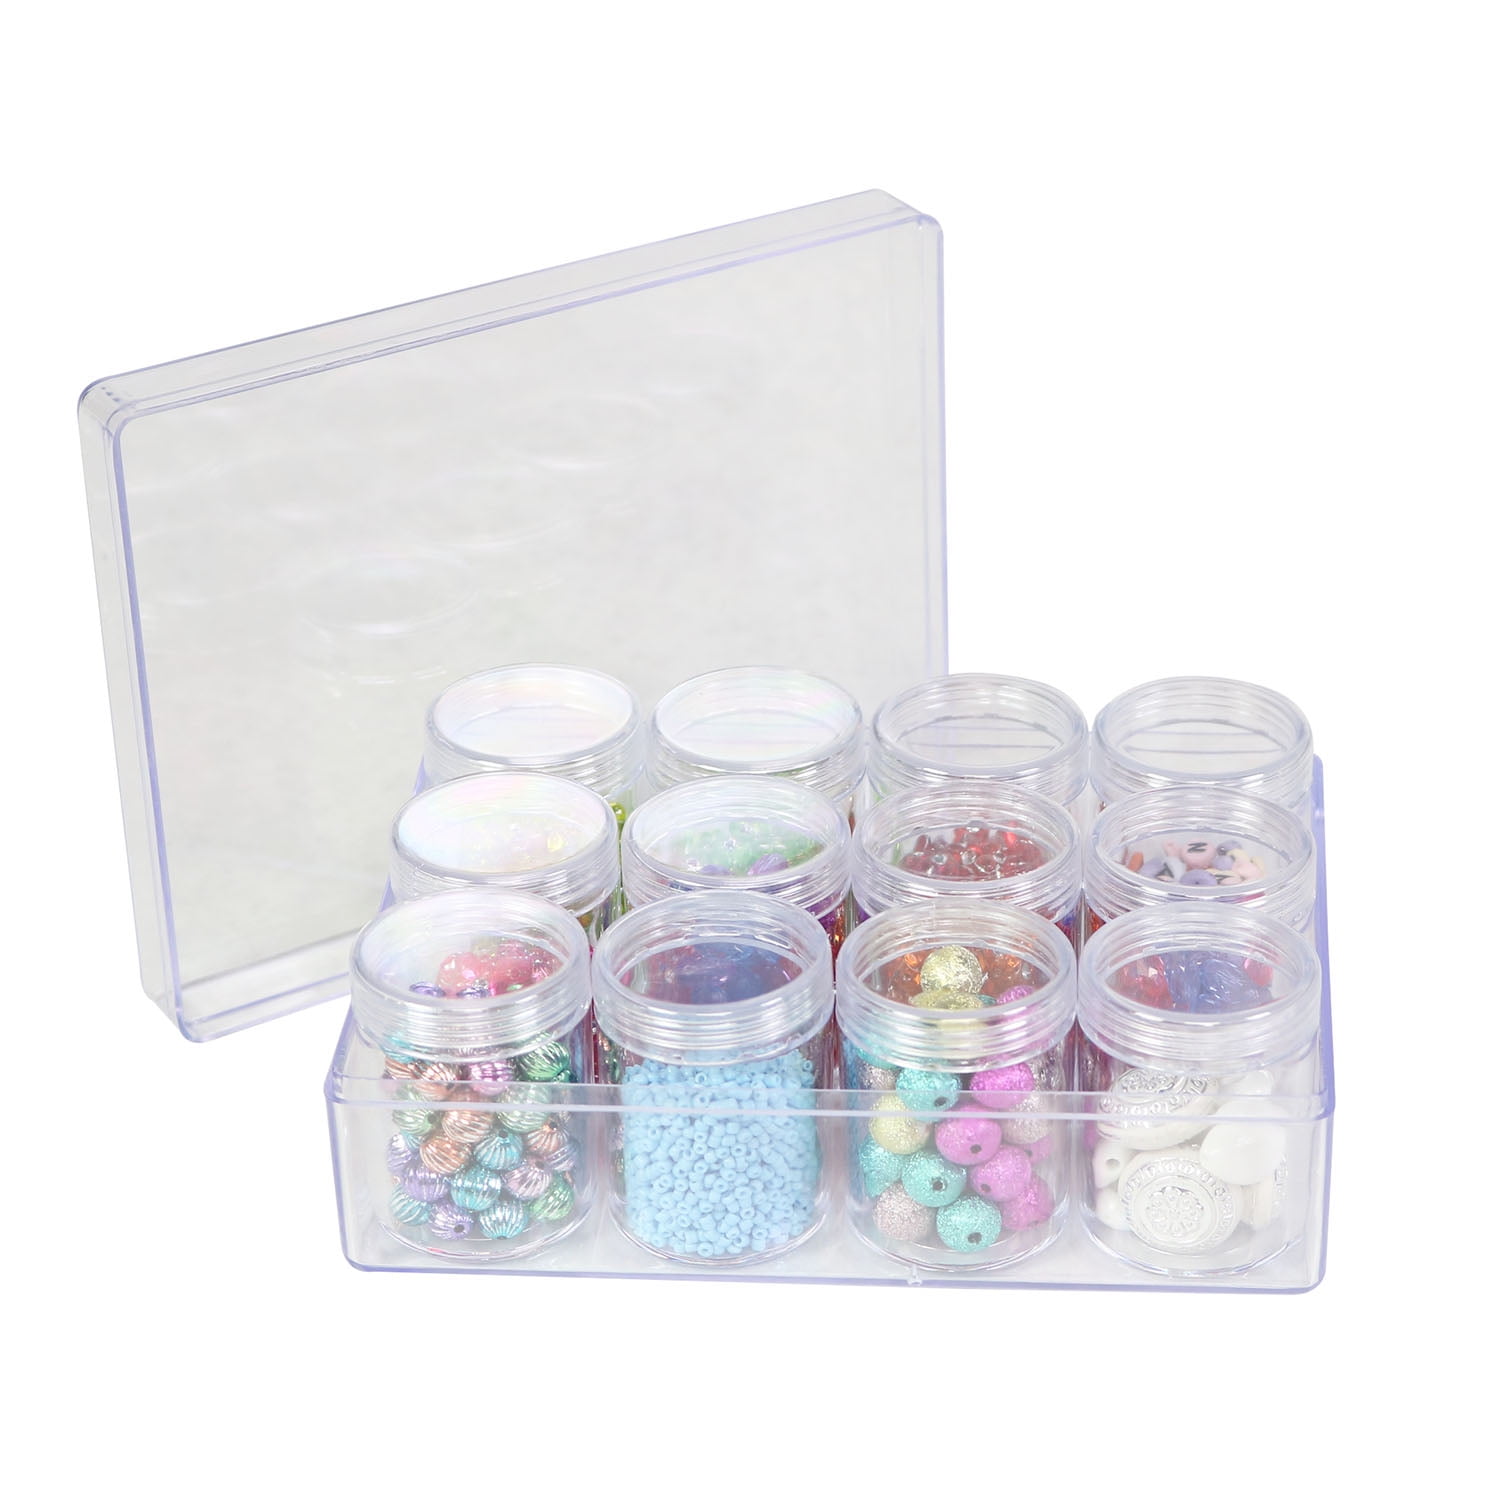 Daiso Mini Pudding Containers Four Packs Of 4 With Lids Great For Crafts  Beads